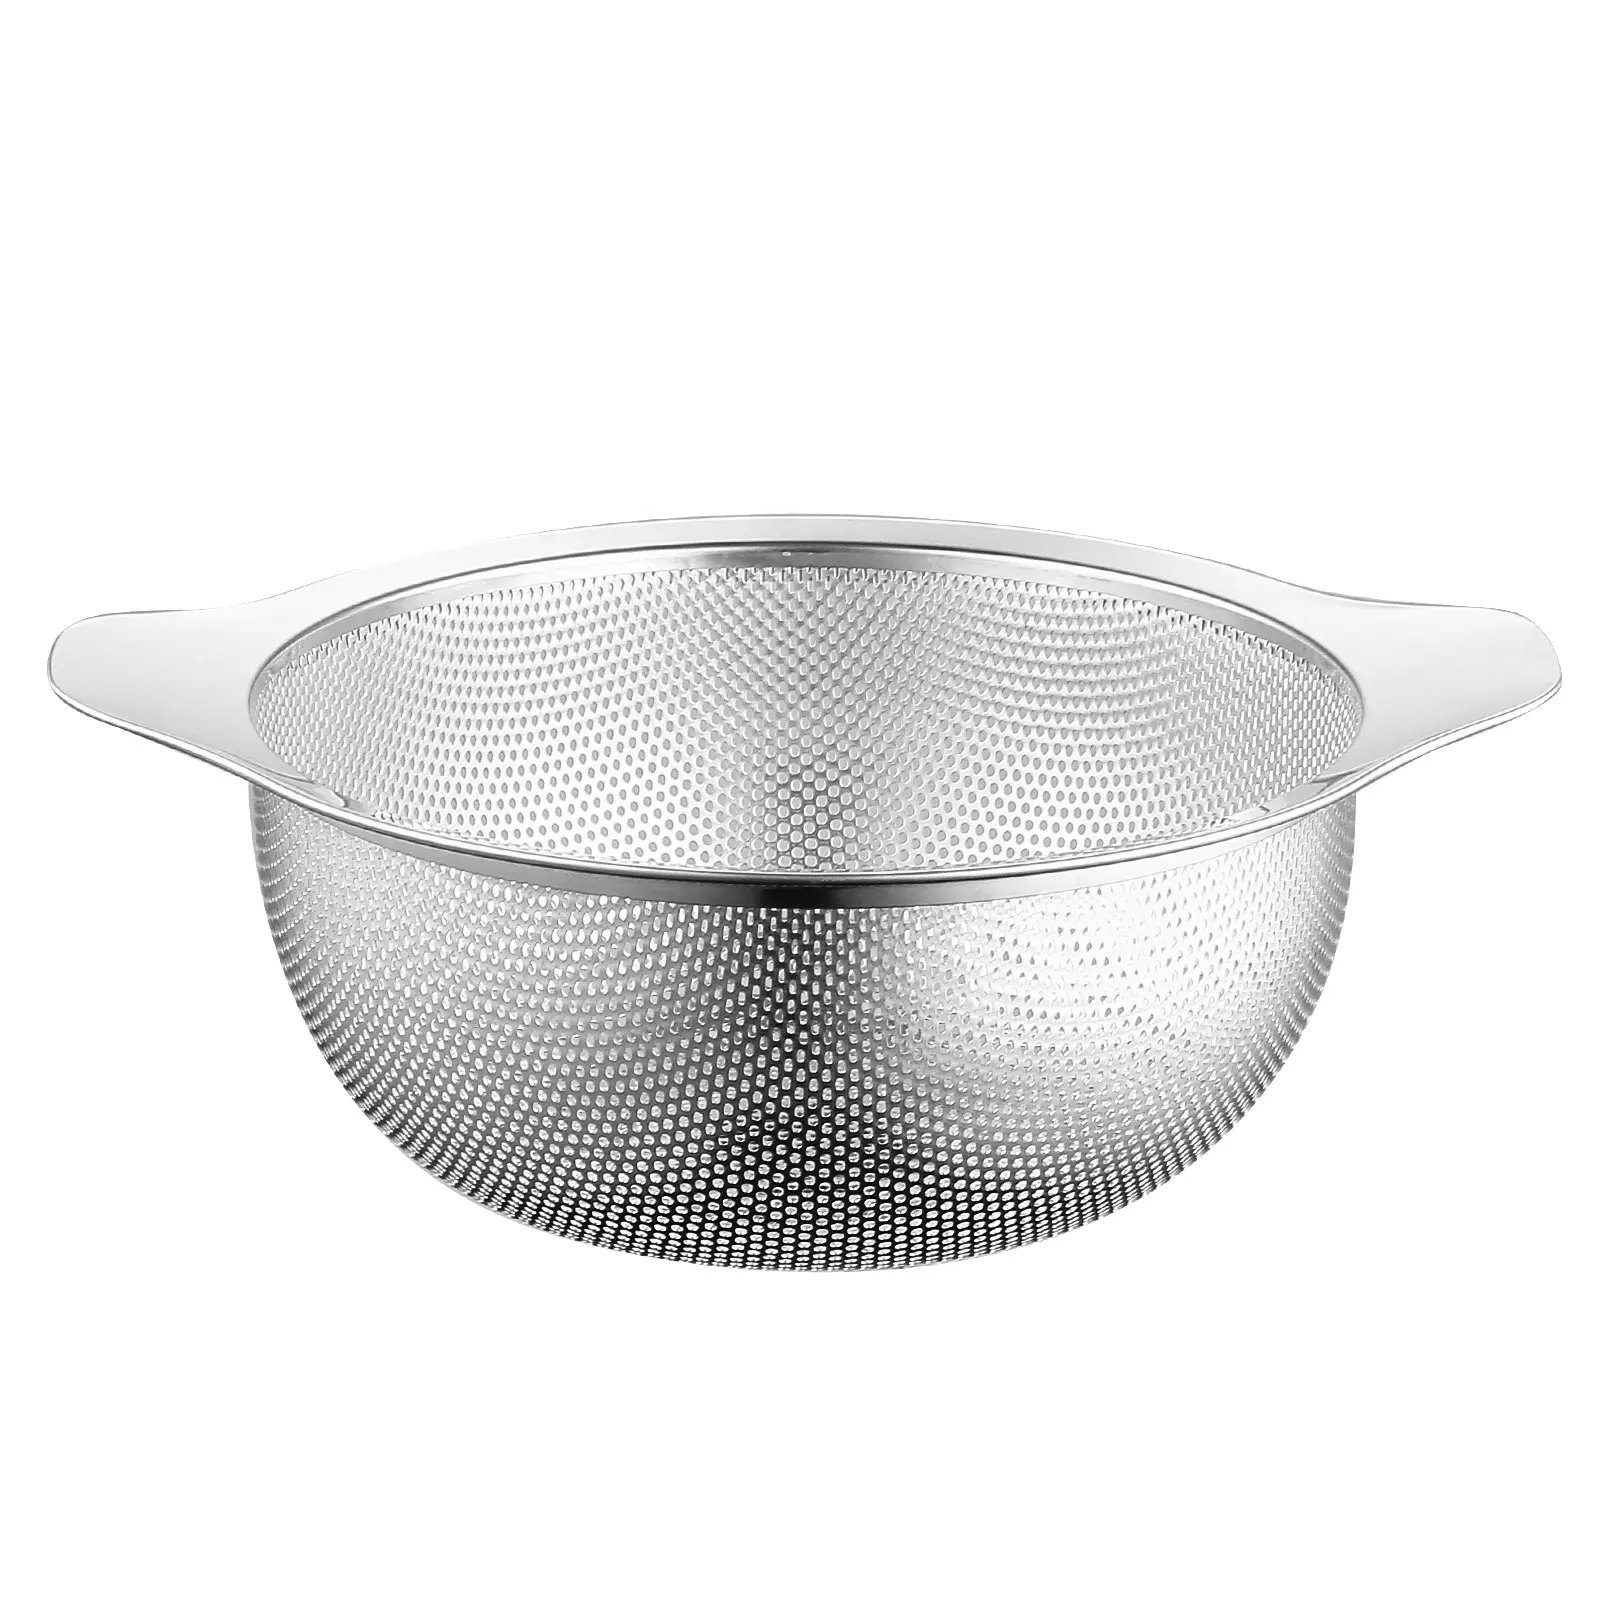 DH Hot Sell Well New Type One-Piece 2mm High Quality Sink Food Strainer Stainless A 24cm Colander Bucket Bowls 18/8 Rust Free